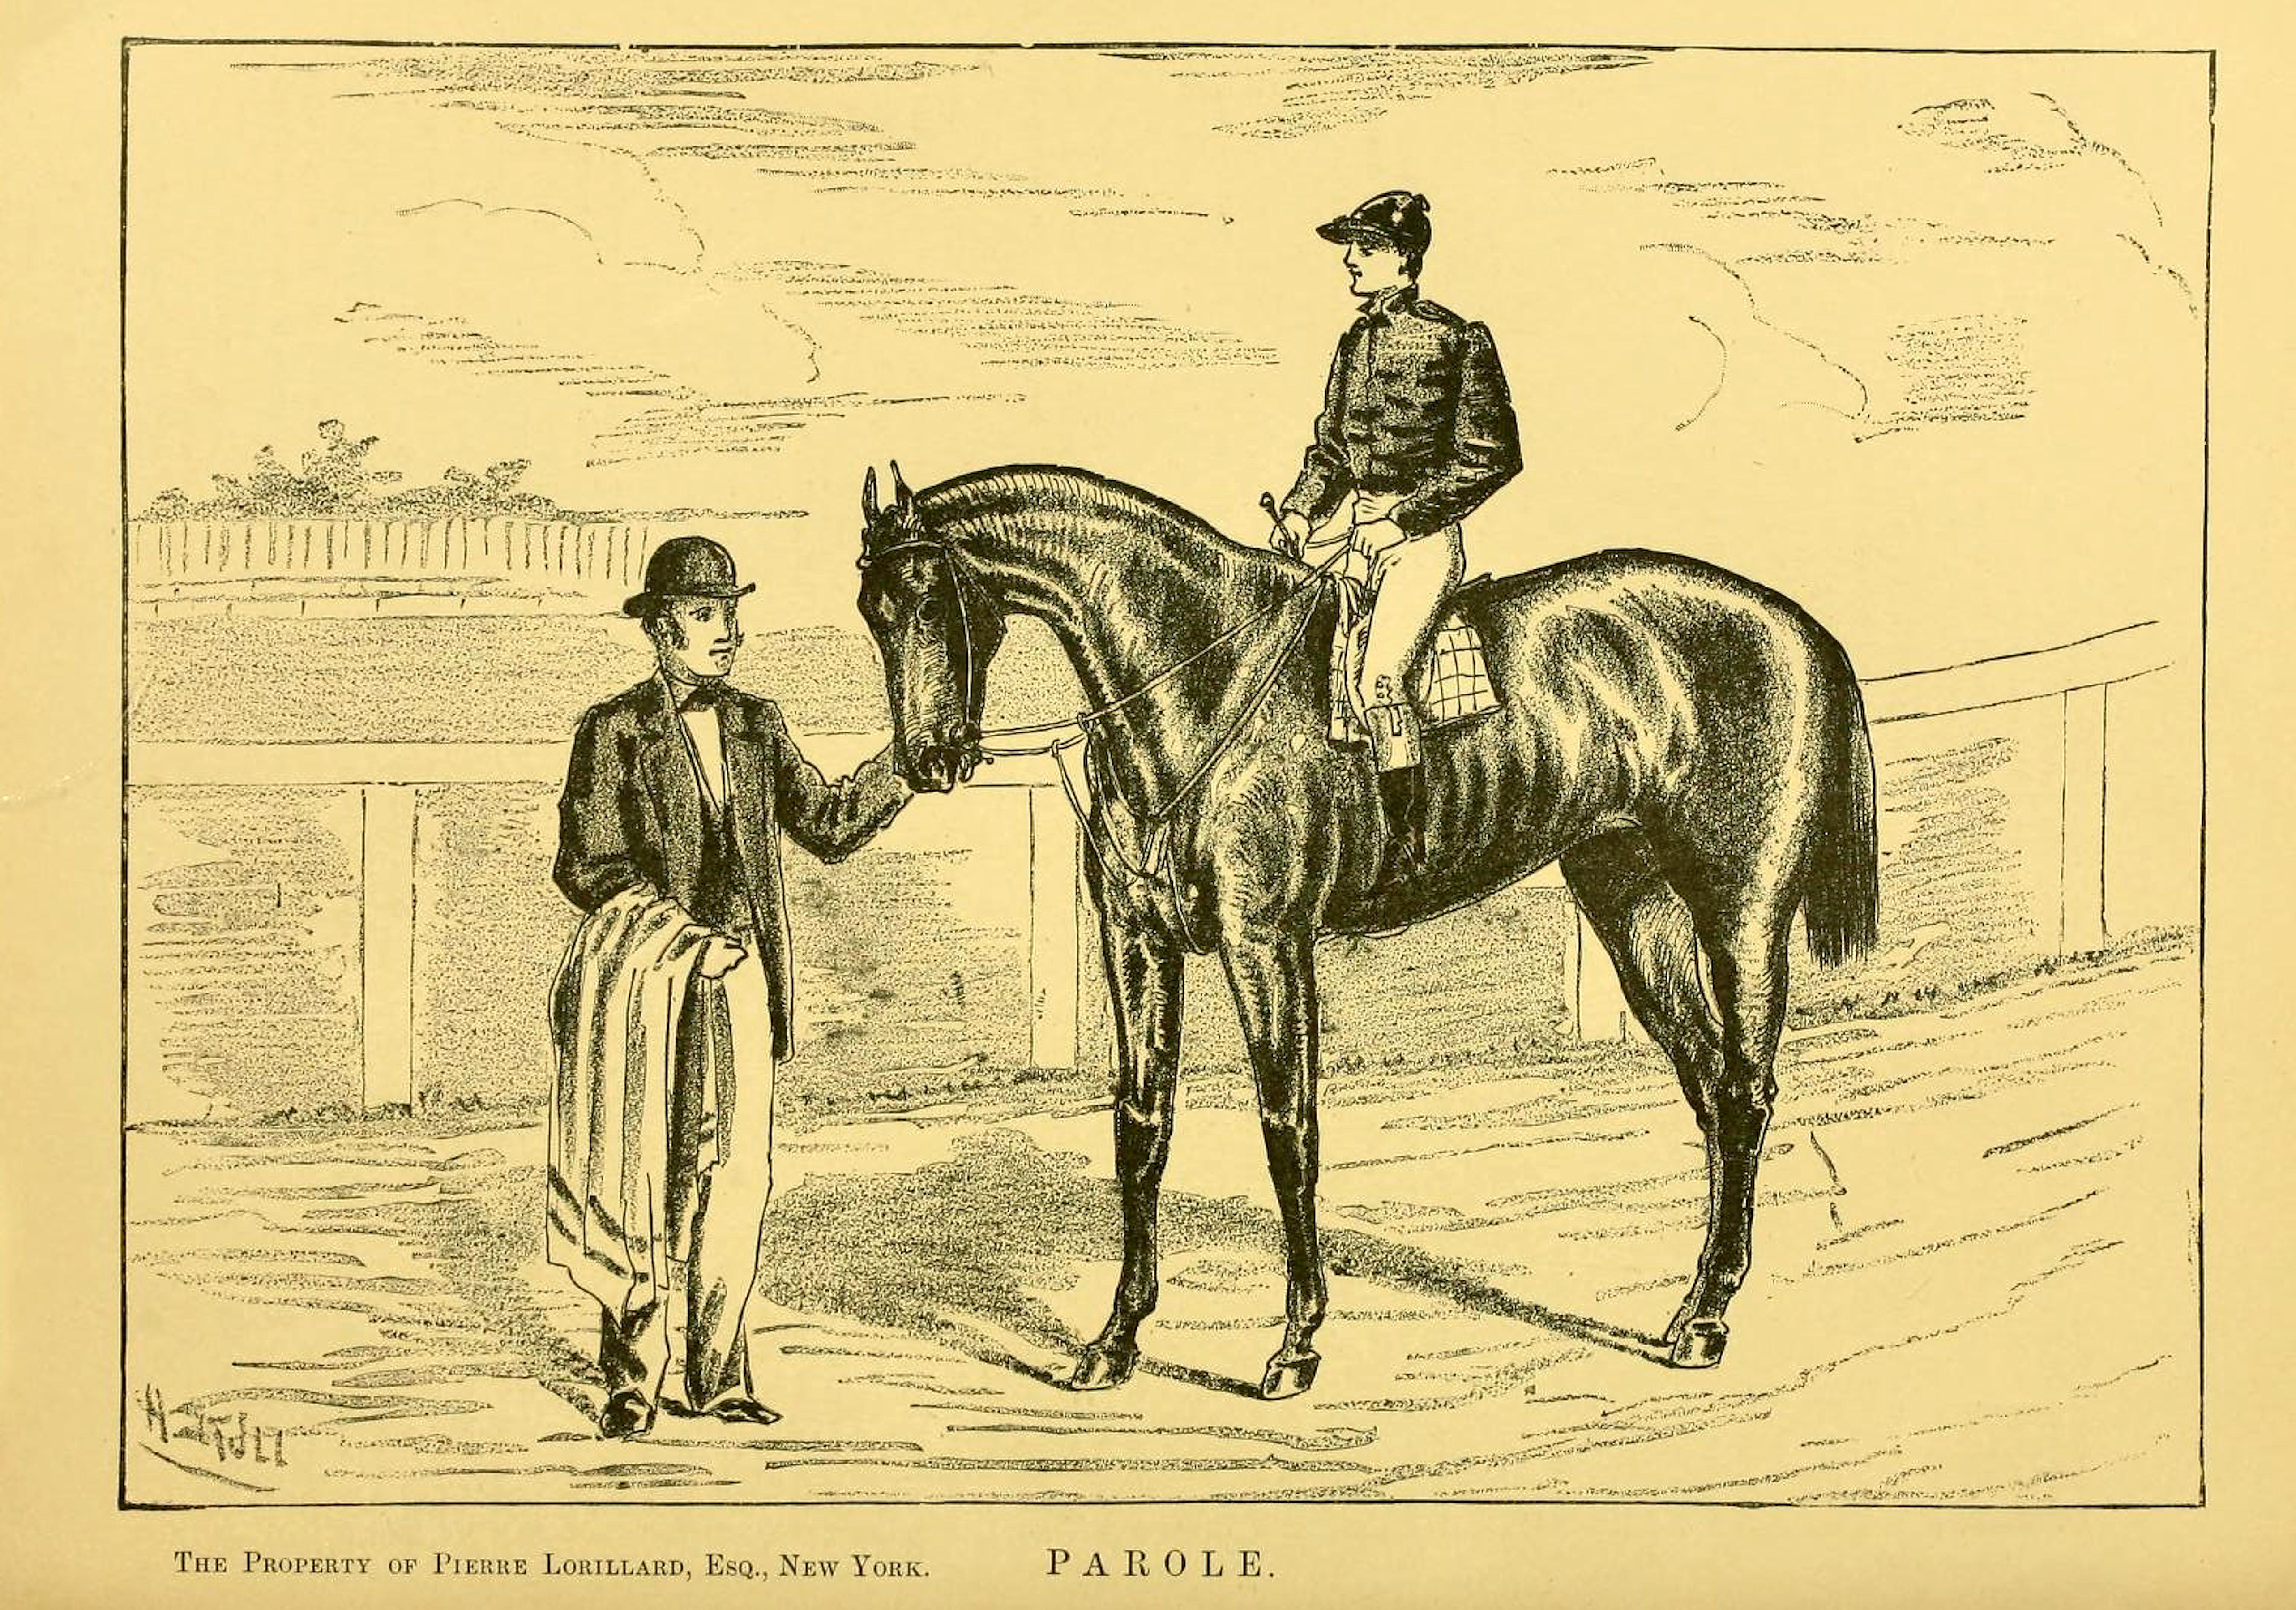 Illustration of Parole from "Famous American Racehorses," 1877 (Museum Collection)